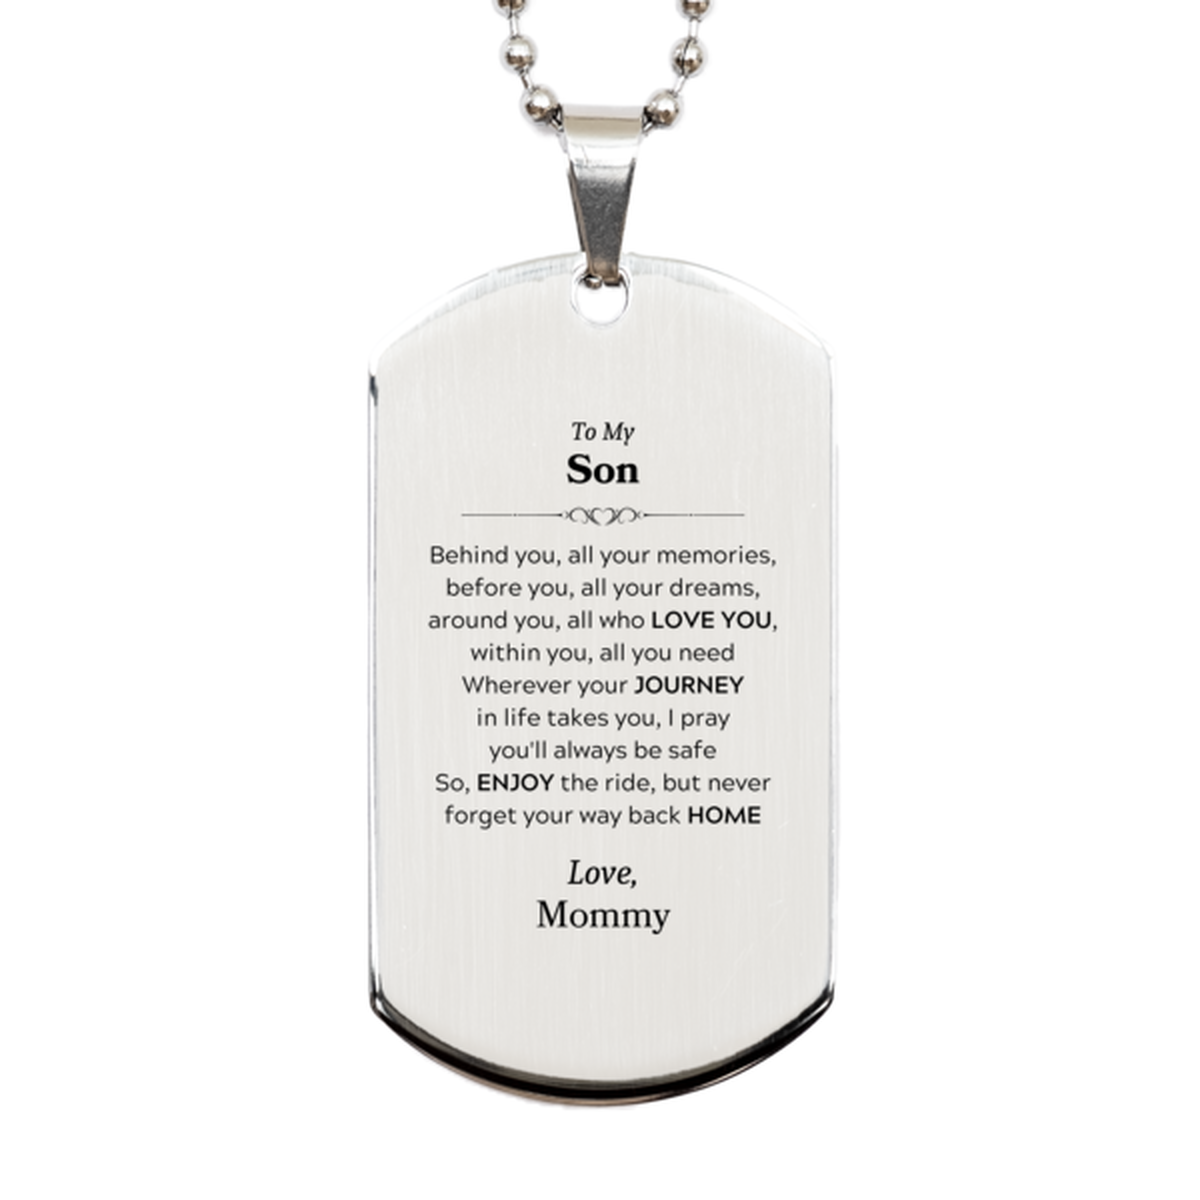 To My Son Graduation Gifts from Mommy, Son Silver Dog Tag Christmas Birthday Gifts for Son Behind you, all your memories, before you, all your dreams. Love, Mommy